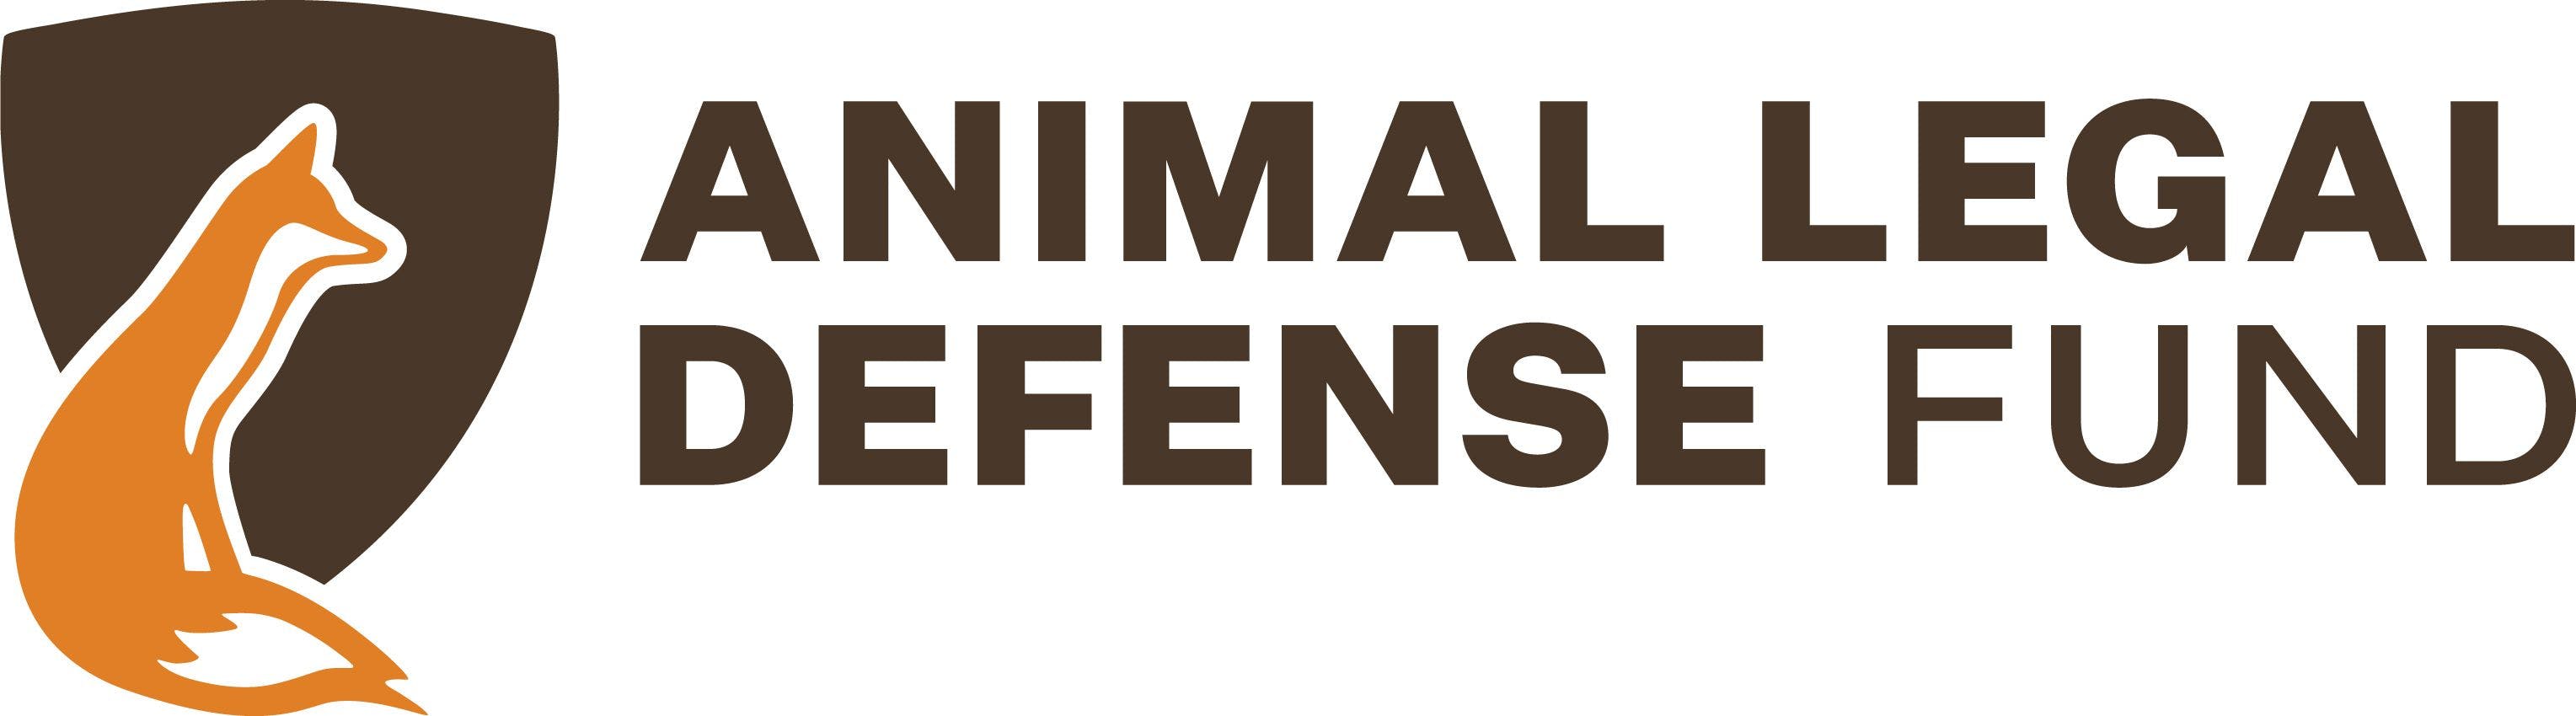 National Justice for Animals Week